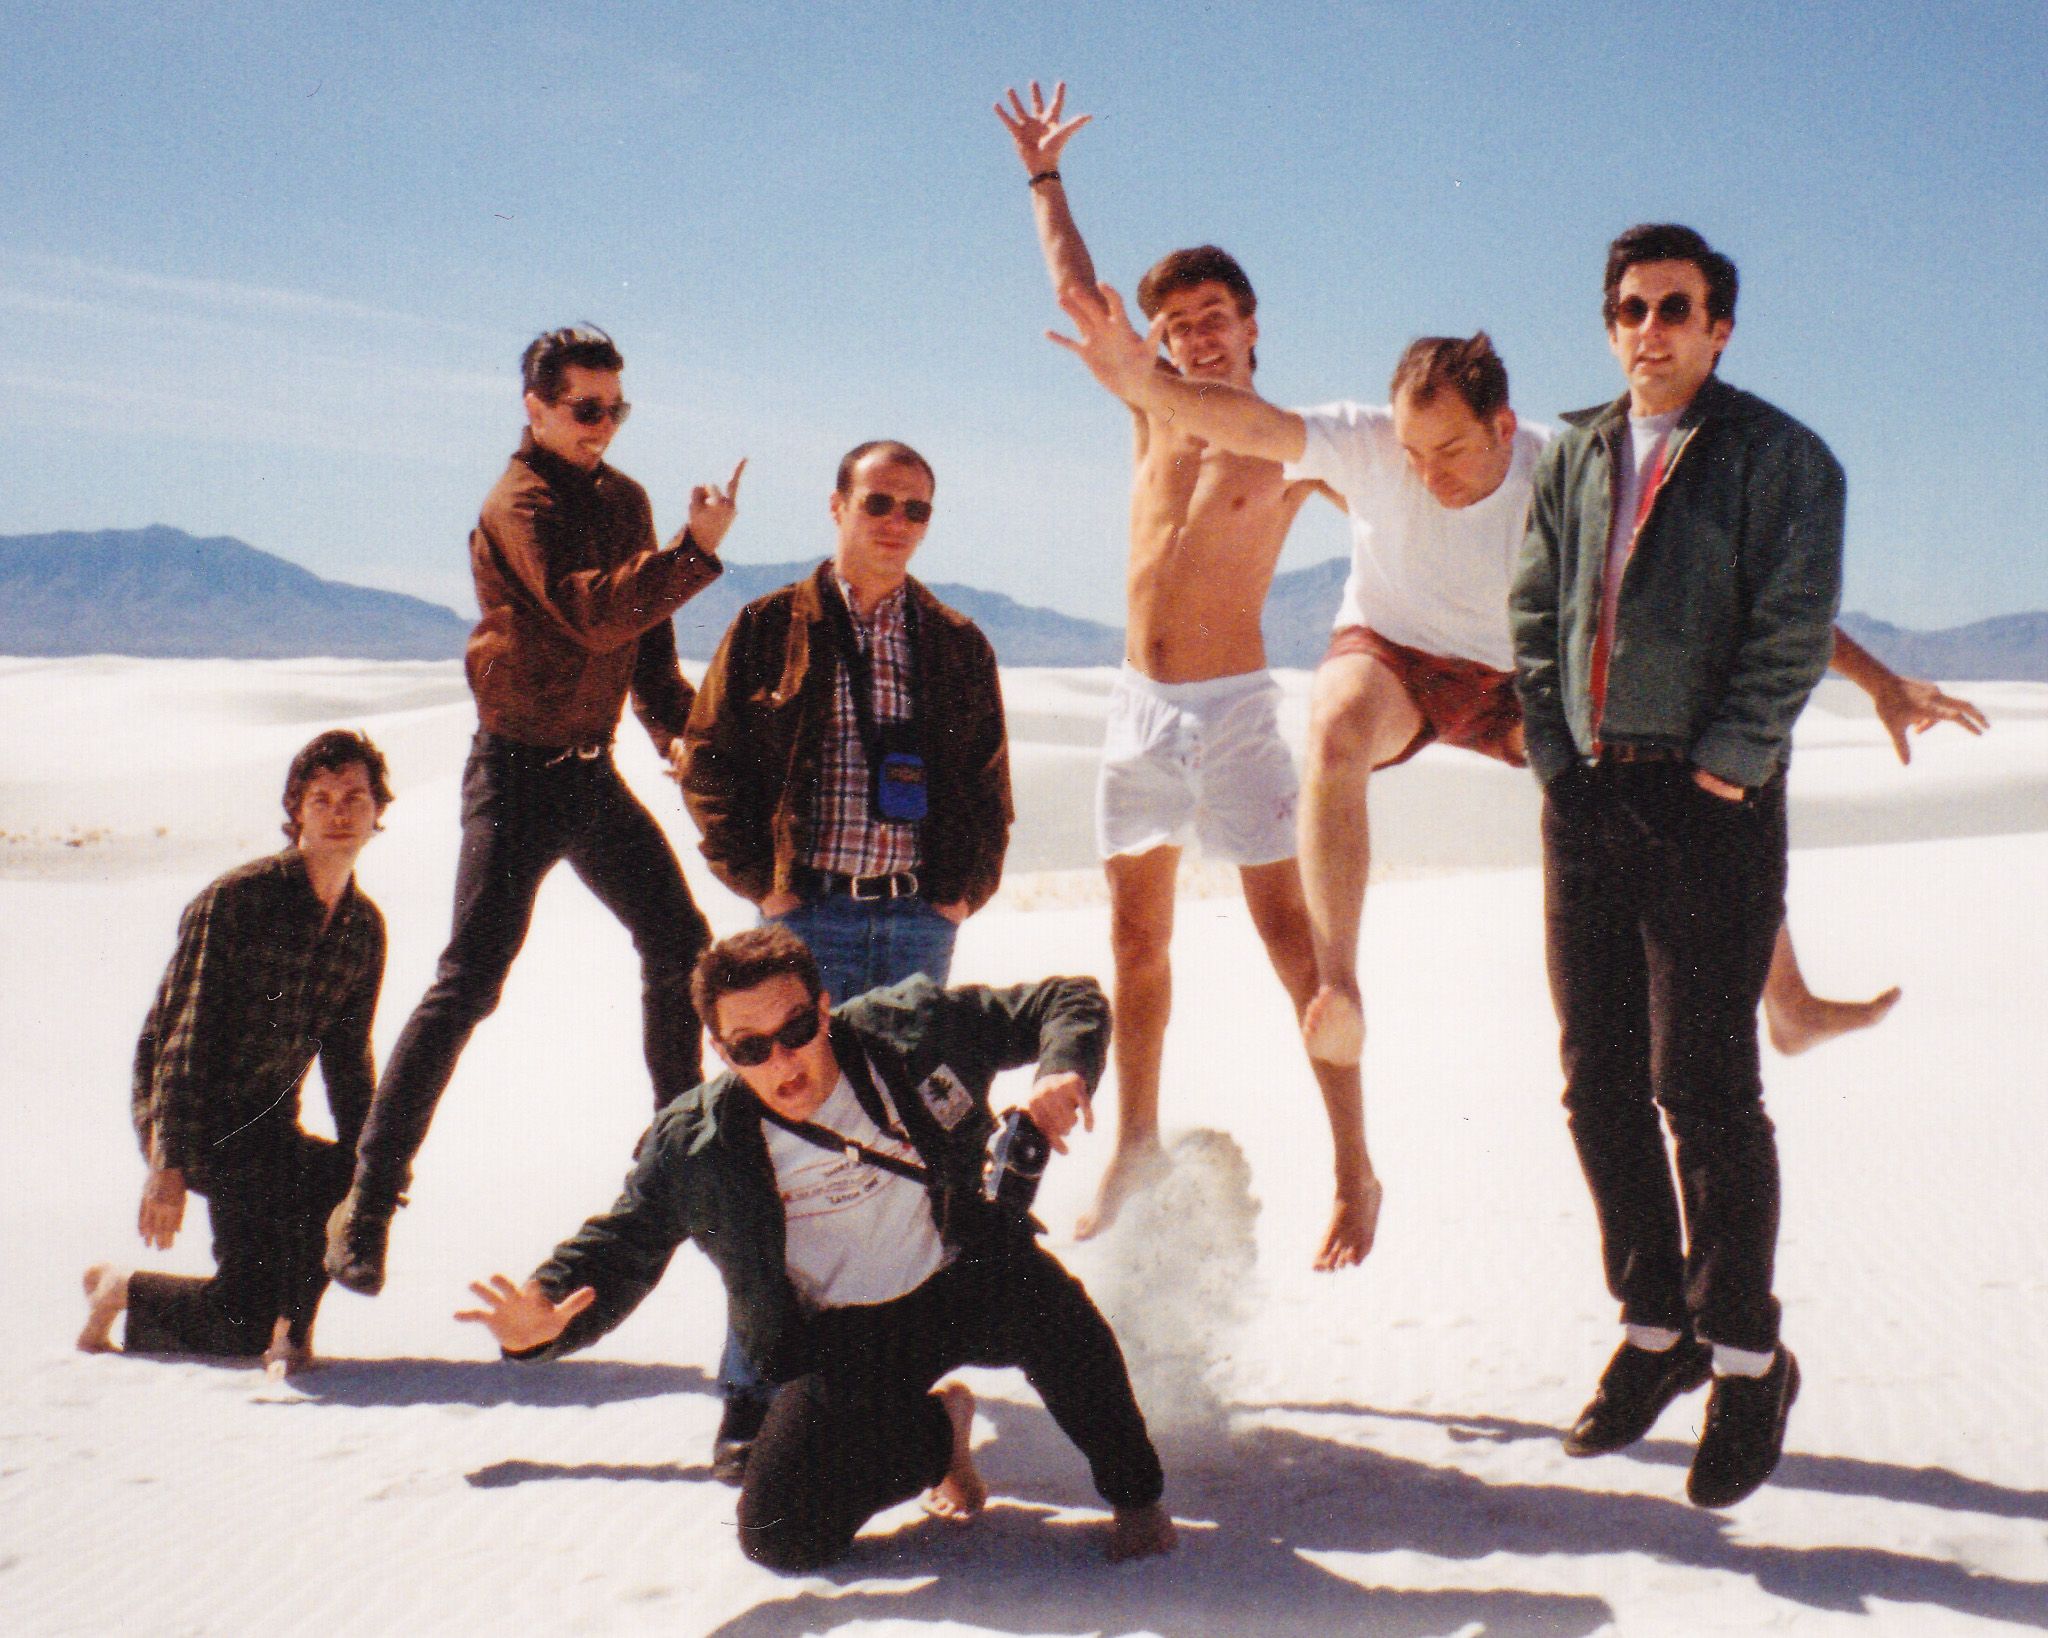 L-R, White Sands, NM, February, 1994: Eli Janney, Bill Barbot, Mike Harbin (falling forward), Me (getting the finger from Bill), Johnny Temple, J. Robbins, Alexis Fleisig. Photo (probably) by Kim Coletta, but it might have been Scott McCloud or Whitney O’Keeffe.